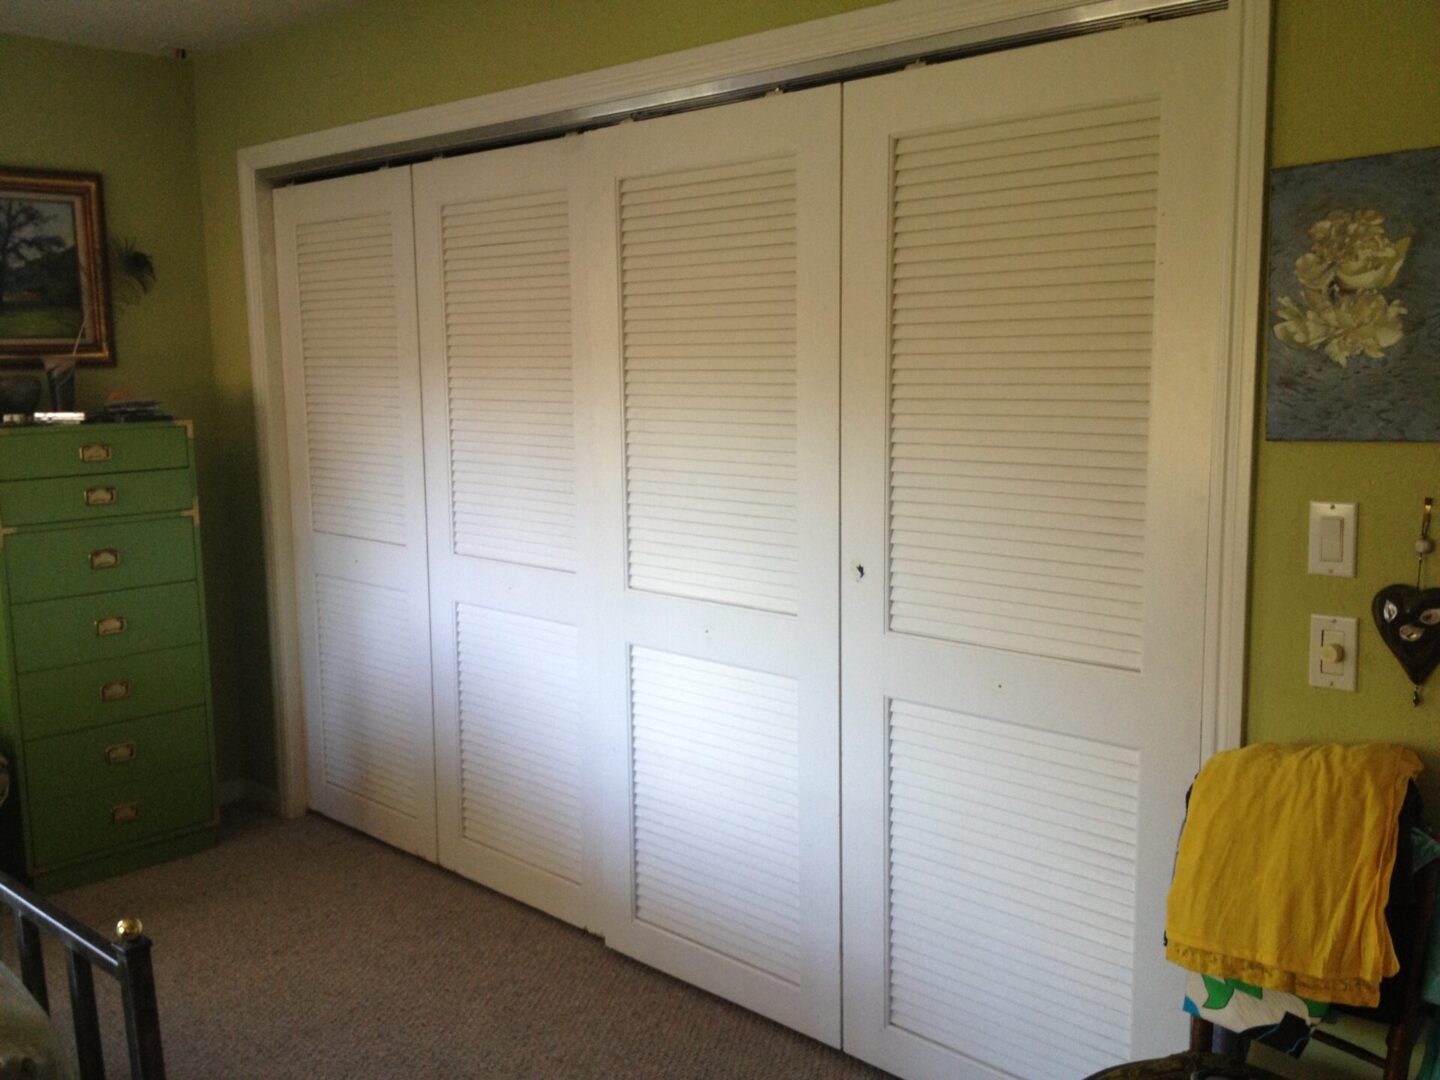 A white closet with sliding doors and a yellow towel.